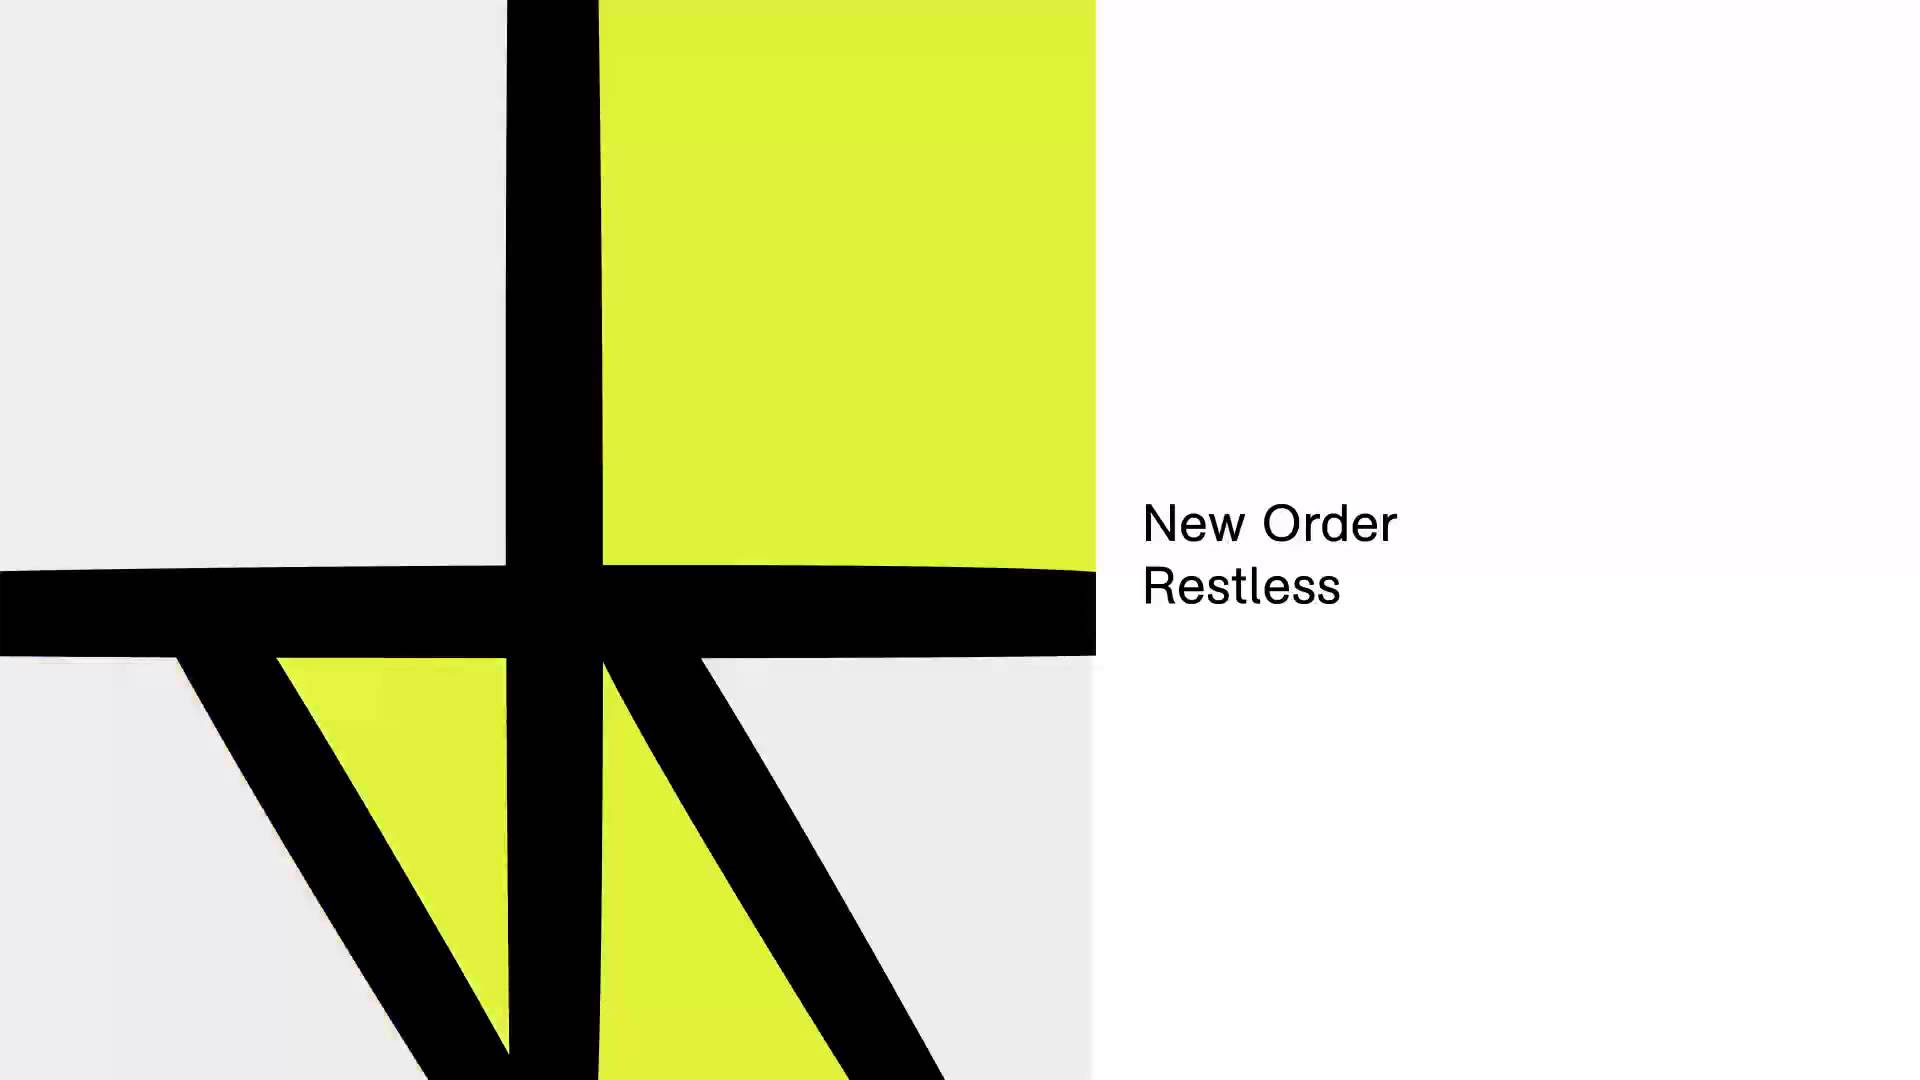 We have new order. New order. New order - Restless. Группа New order. New order confusion.